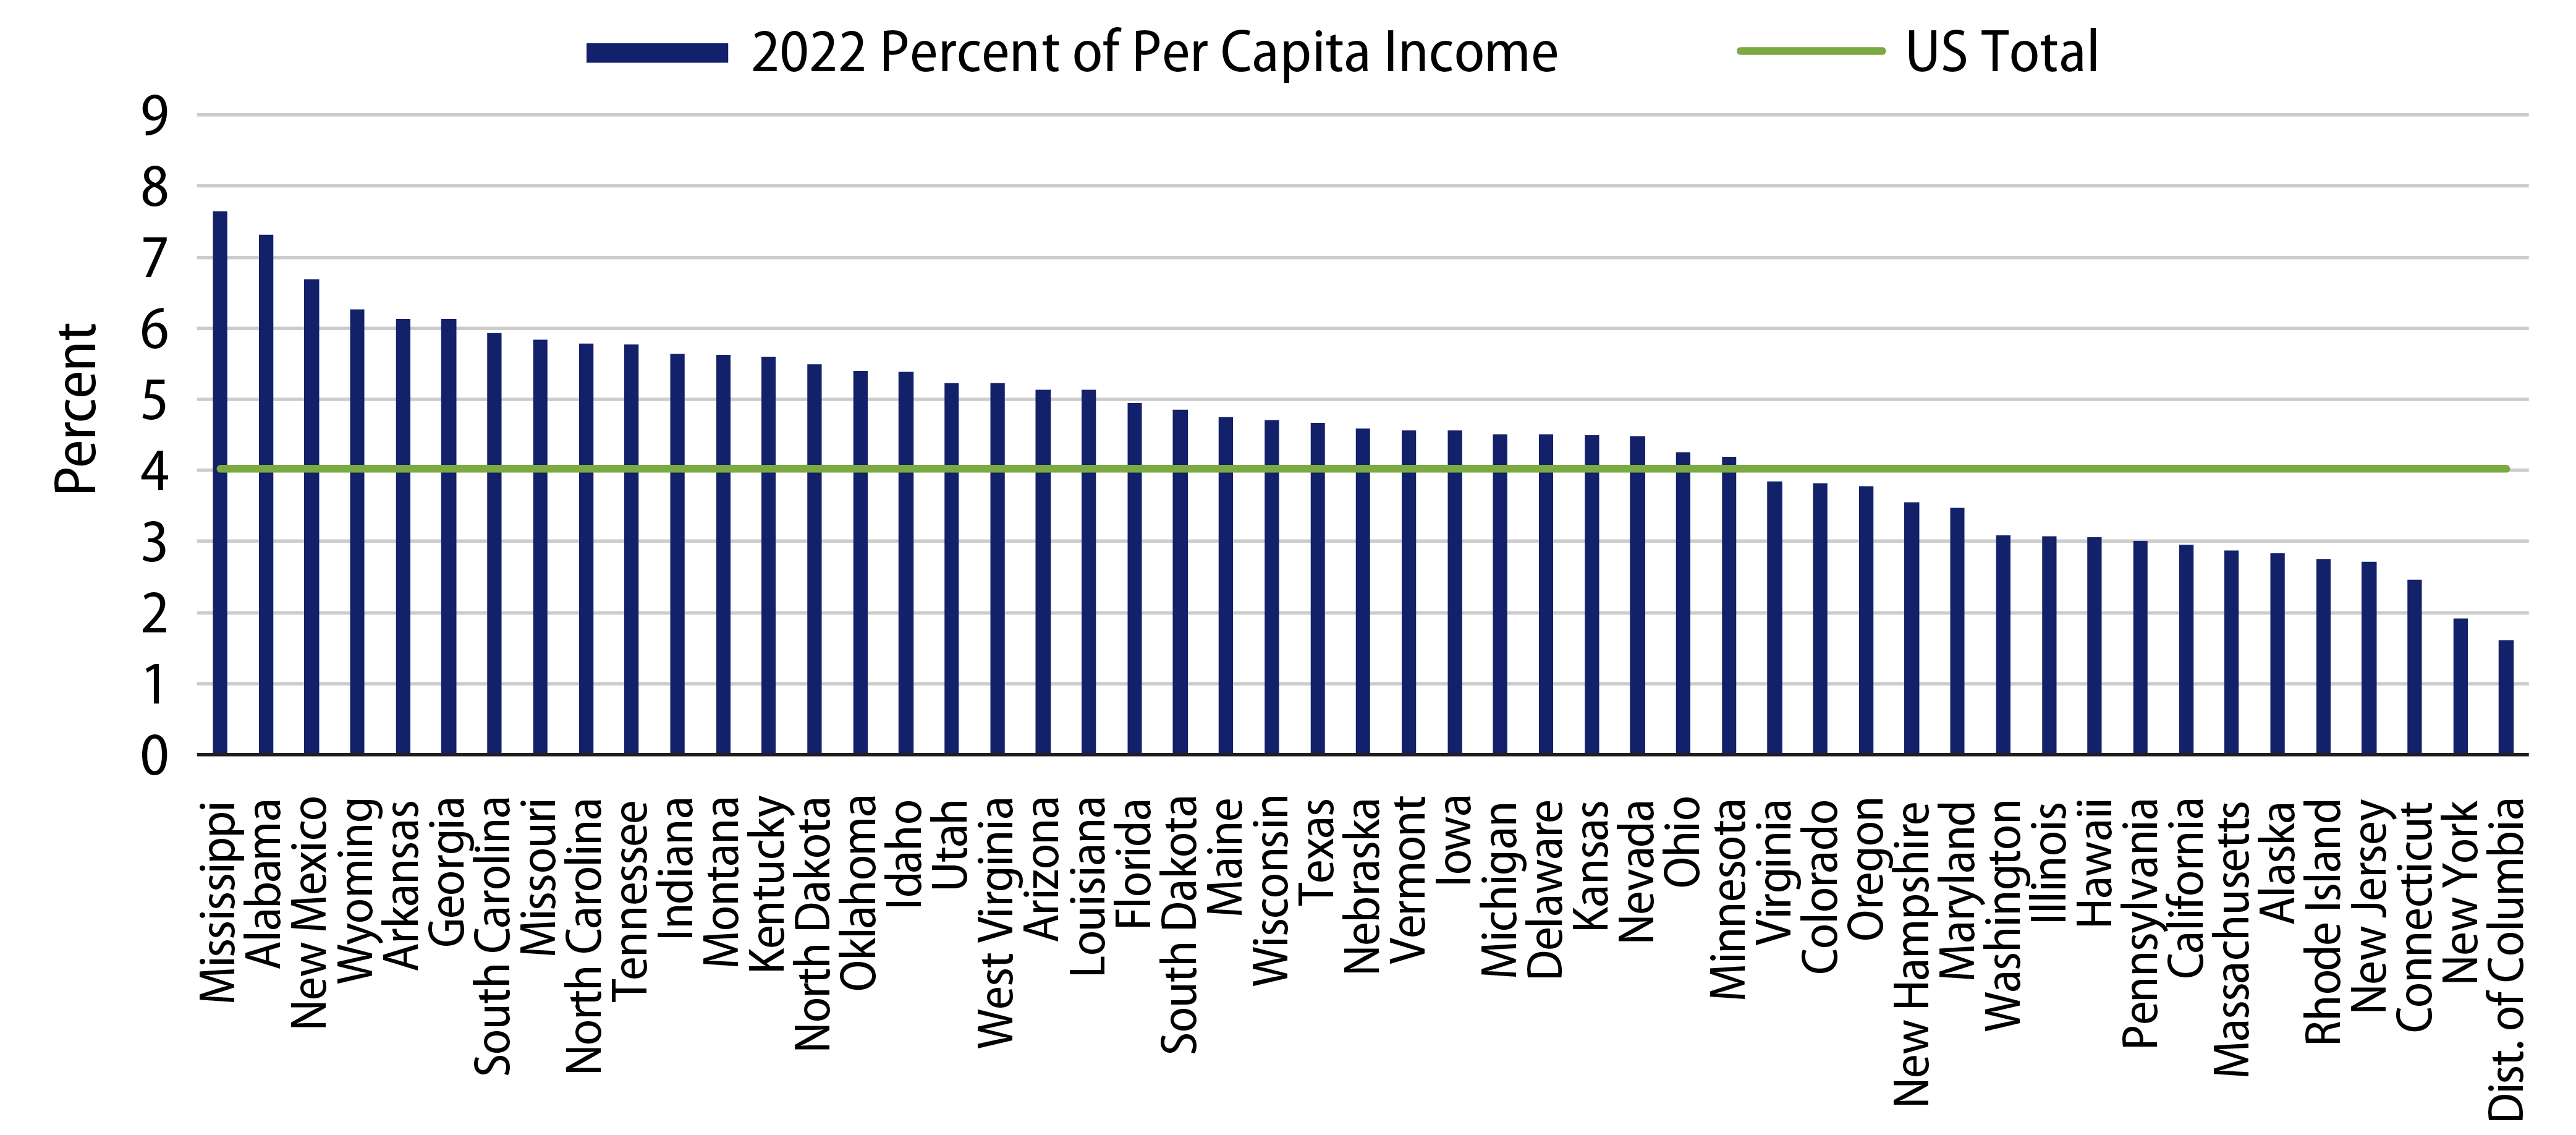 Explore Average 2022 Cost of Gas as Percent of Per Capital Income by State